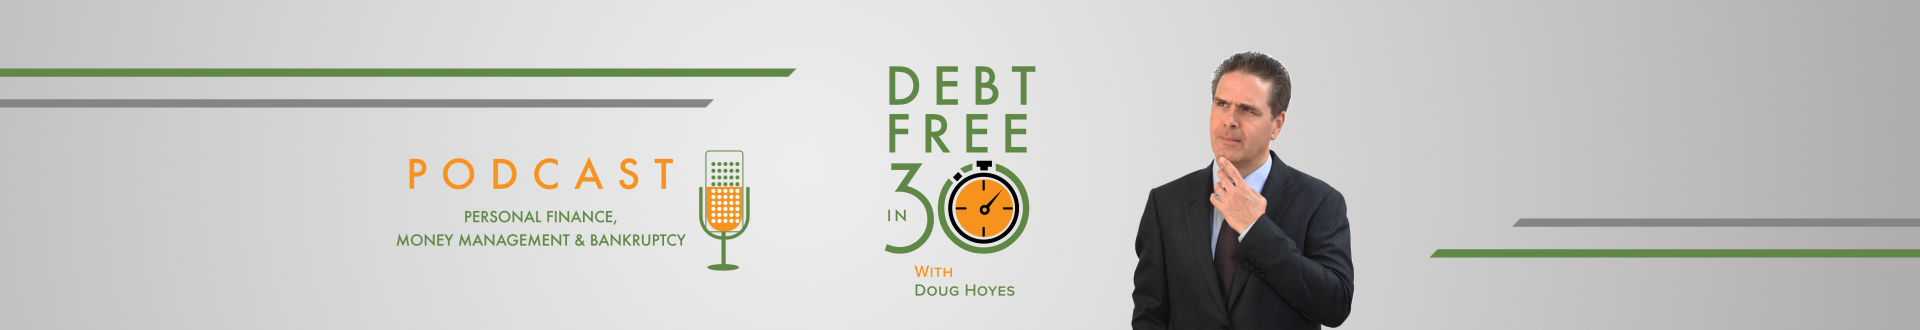 Debt Free in 30 Podcast Archive - Page 39